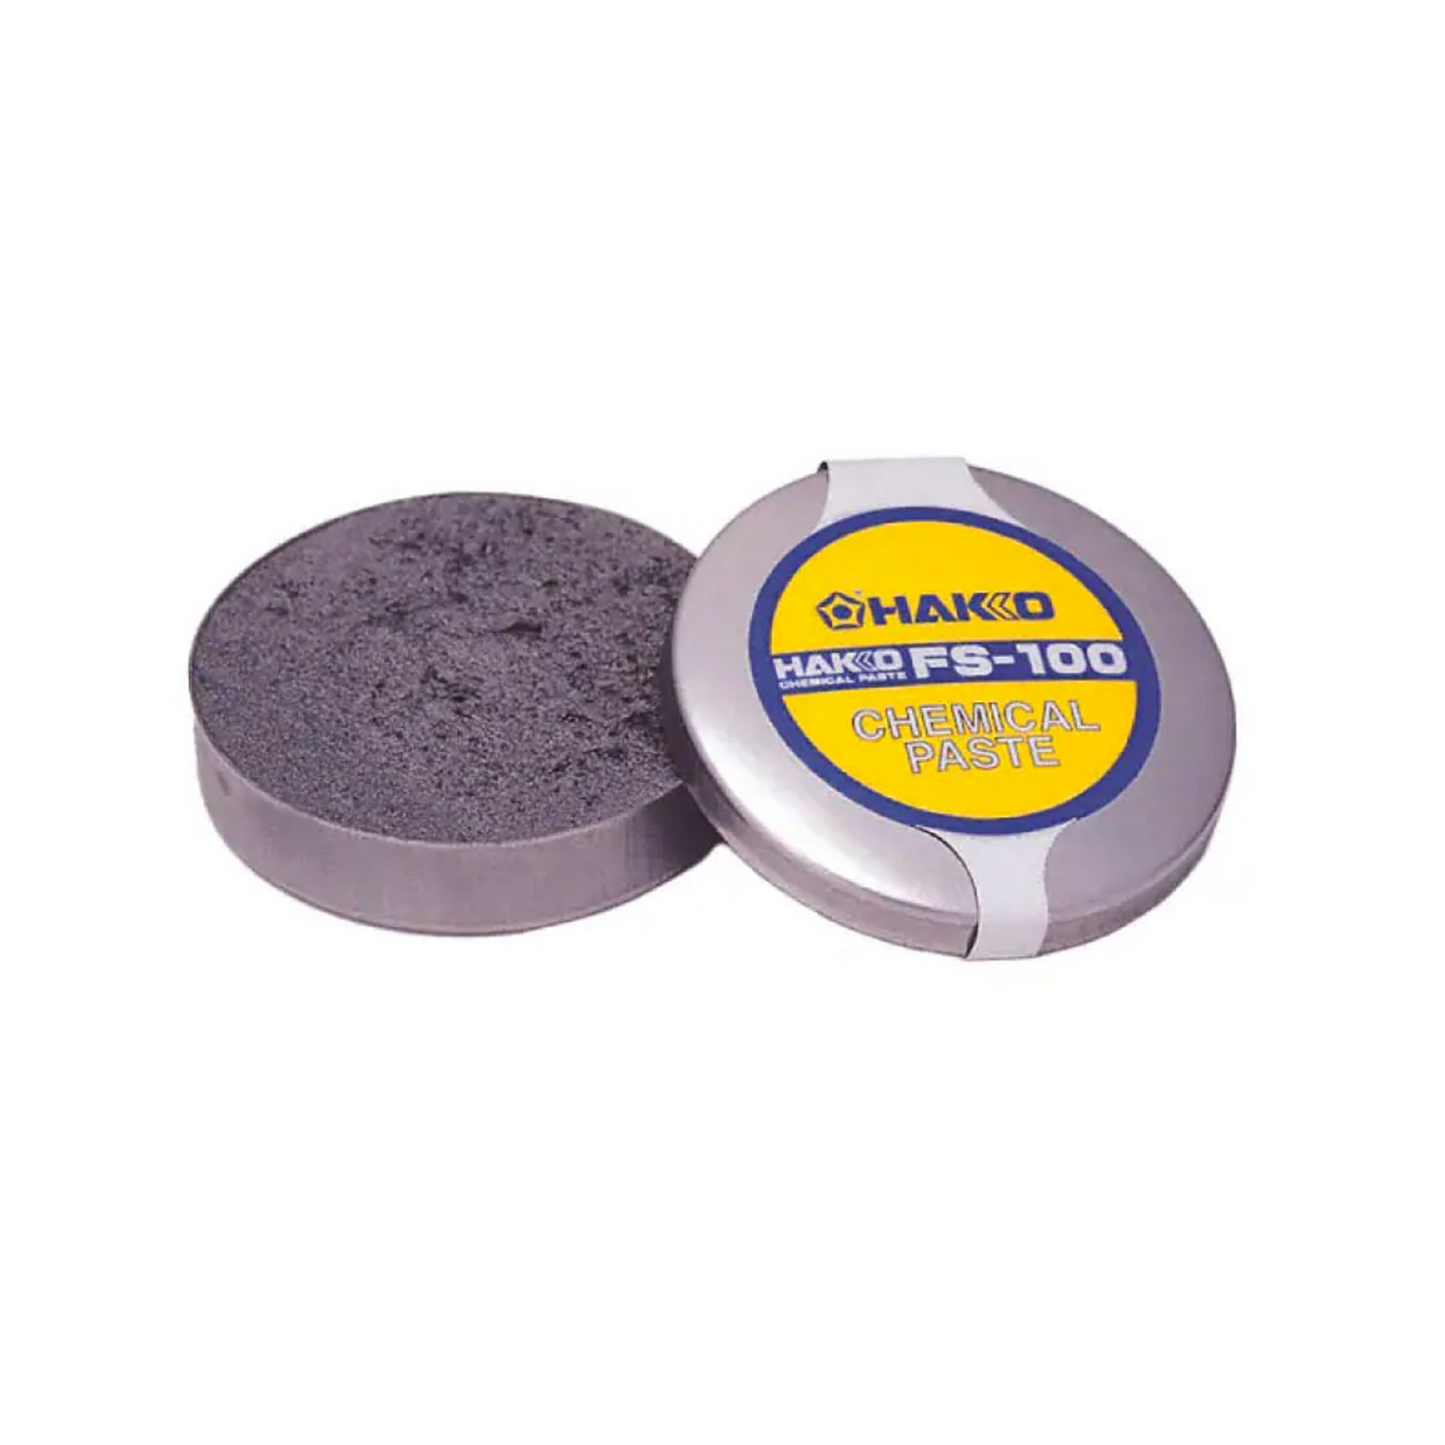 Hakko FS100 Chemical Paste for protecting soldering iron tips